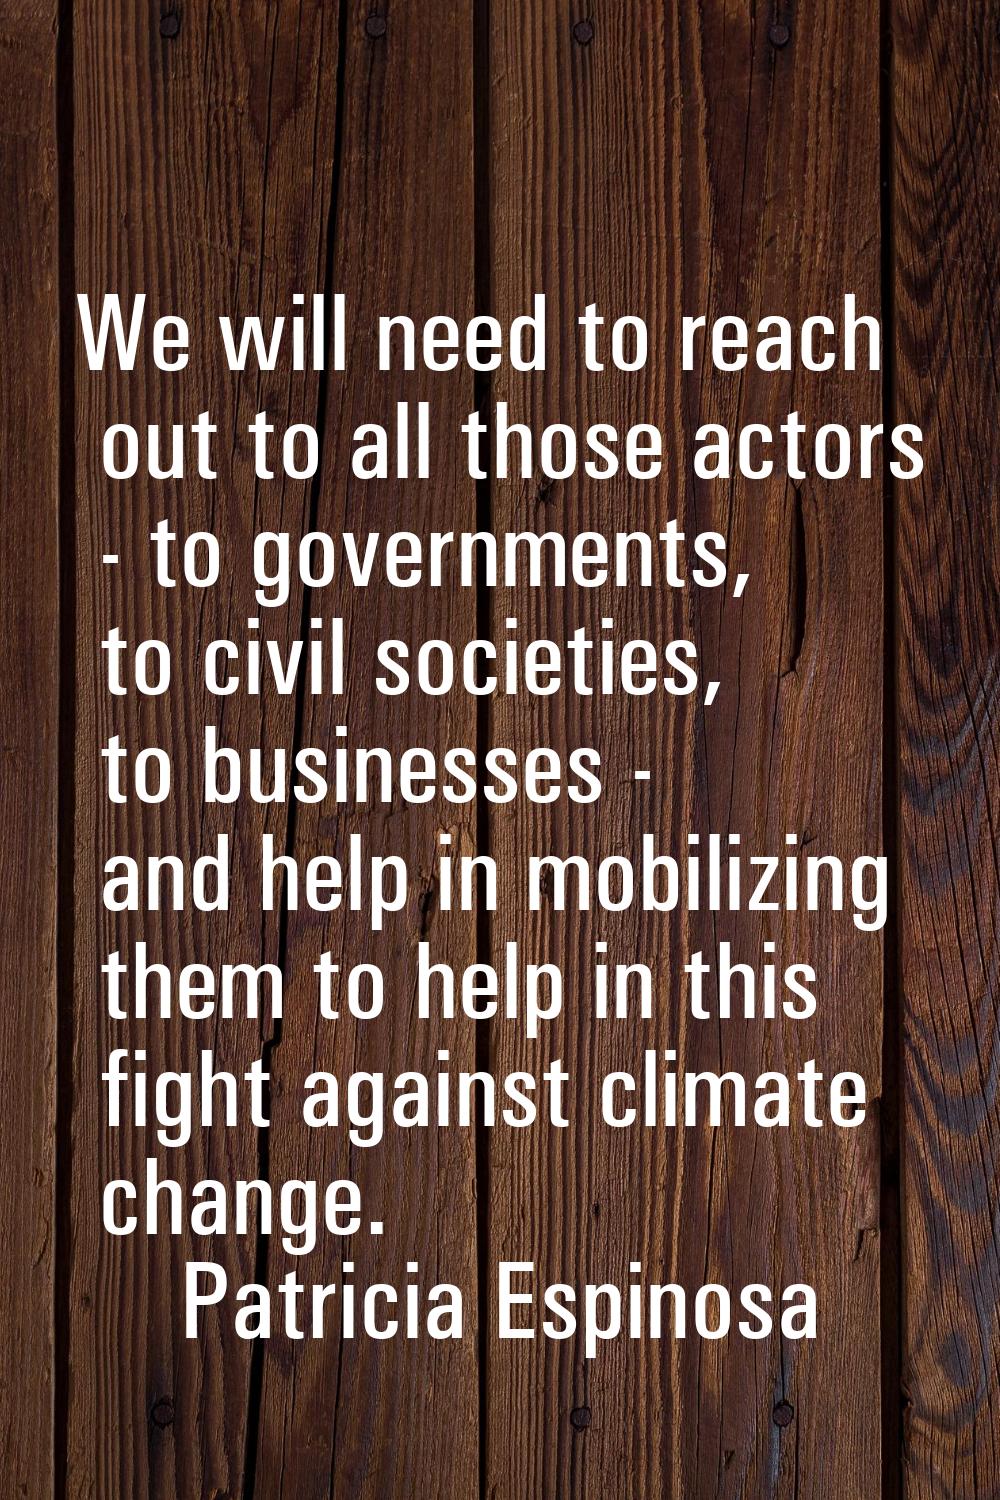 We will need to reach out to all those actors - to governments, to civil societies, to businesses -